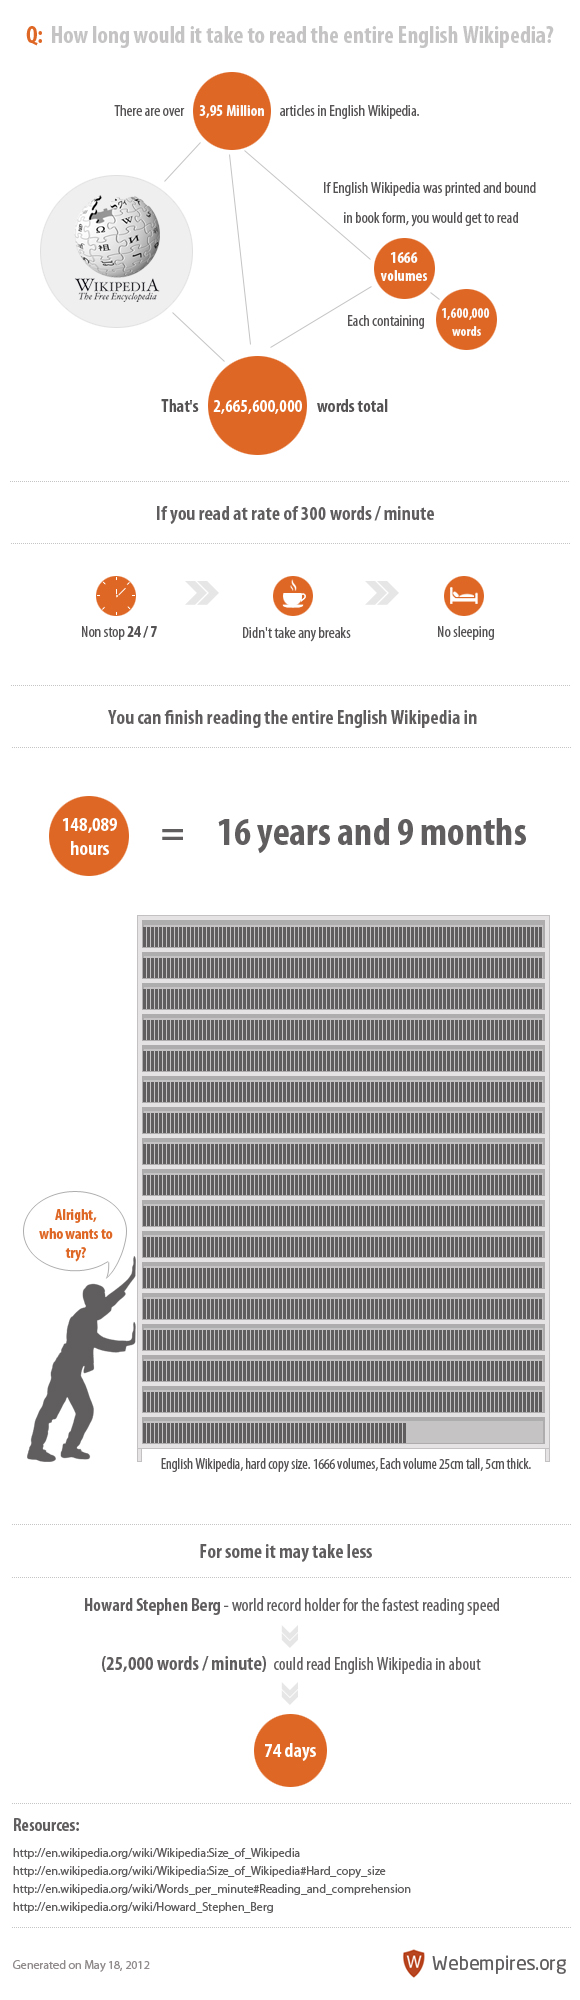 How Long Would It Take To Read Entire English Wikipedia [Infographic]